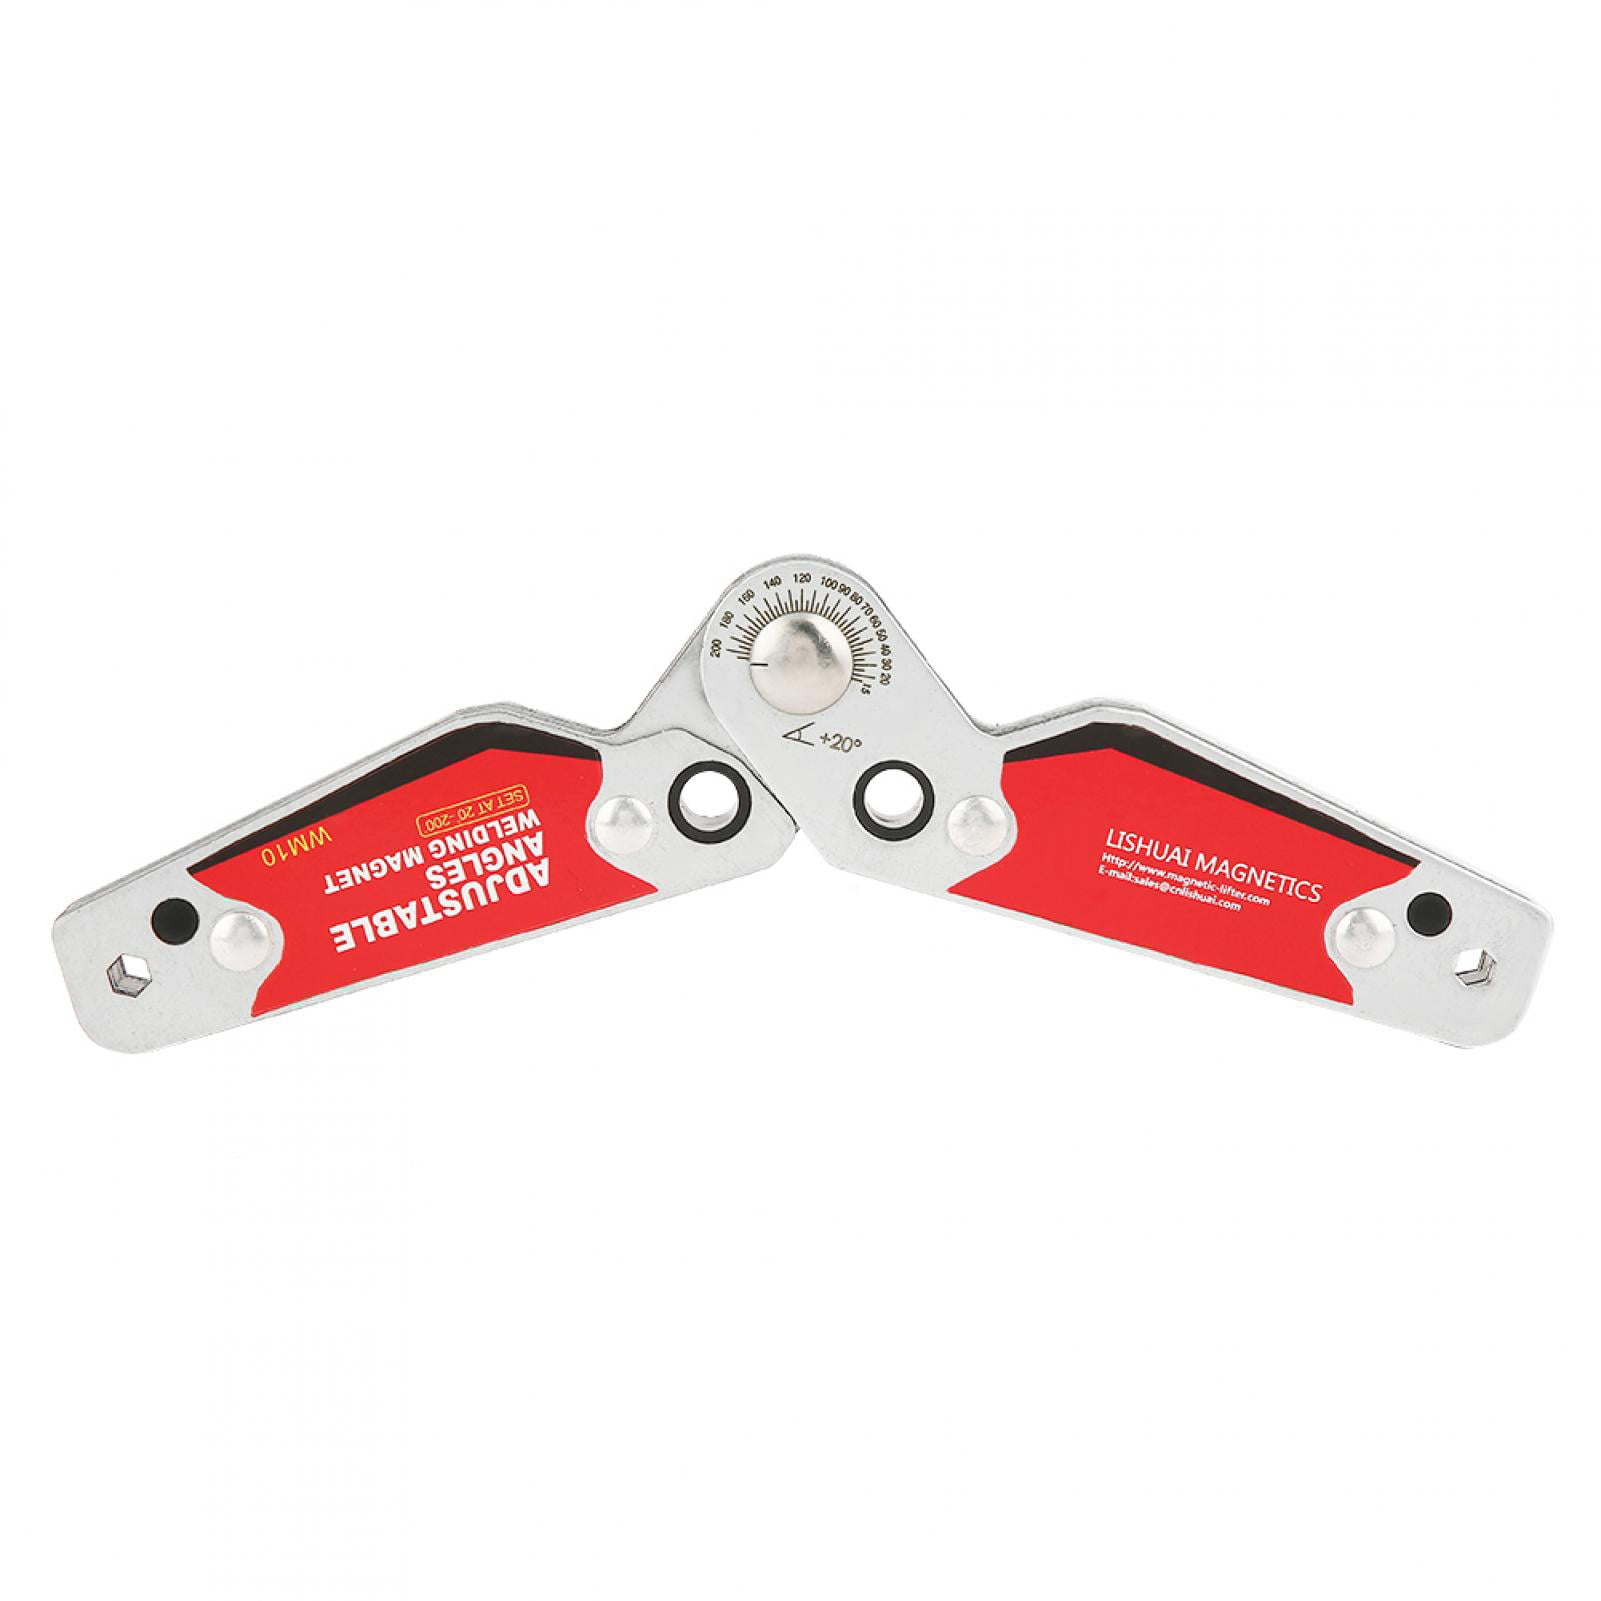 Adjustable Angles 20°-200° Welding Magnets Angle Clamp Finder Positioner Locator Tools with Hex Wrench Shanbor Magnetic Welding Holder 